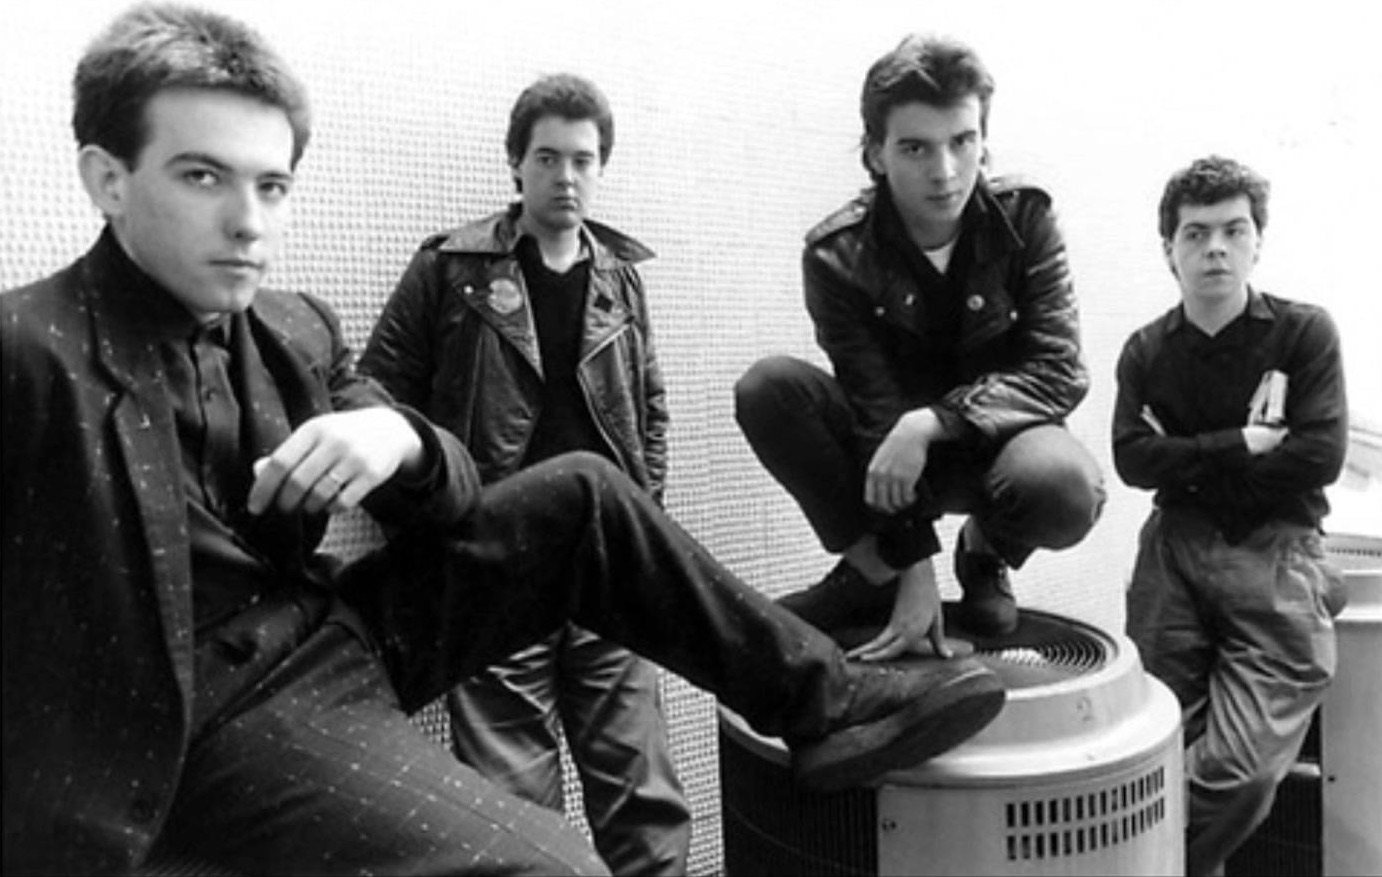 Behind the Band Name: The Cure - American Songwriter